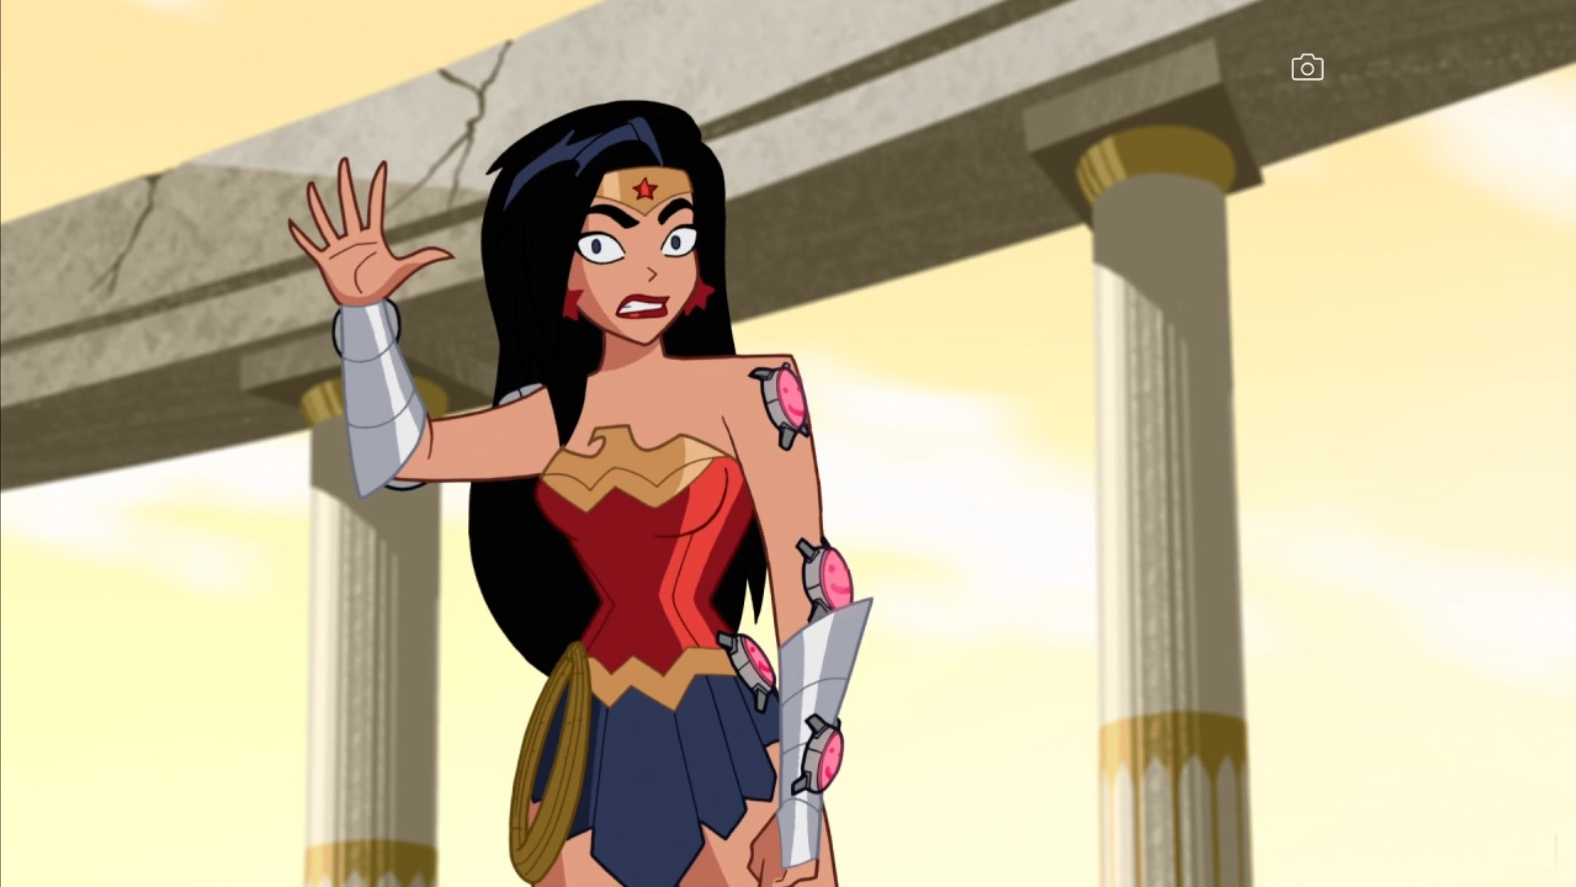 Wonder Woman - Justice League Animated by creativecustomart on DeviantArt